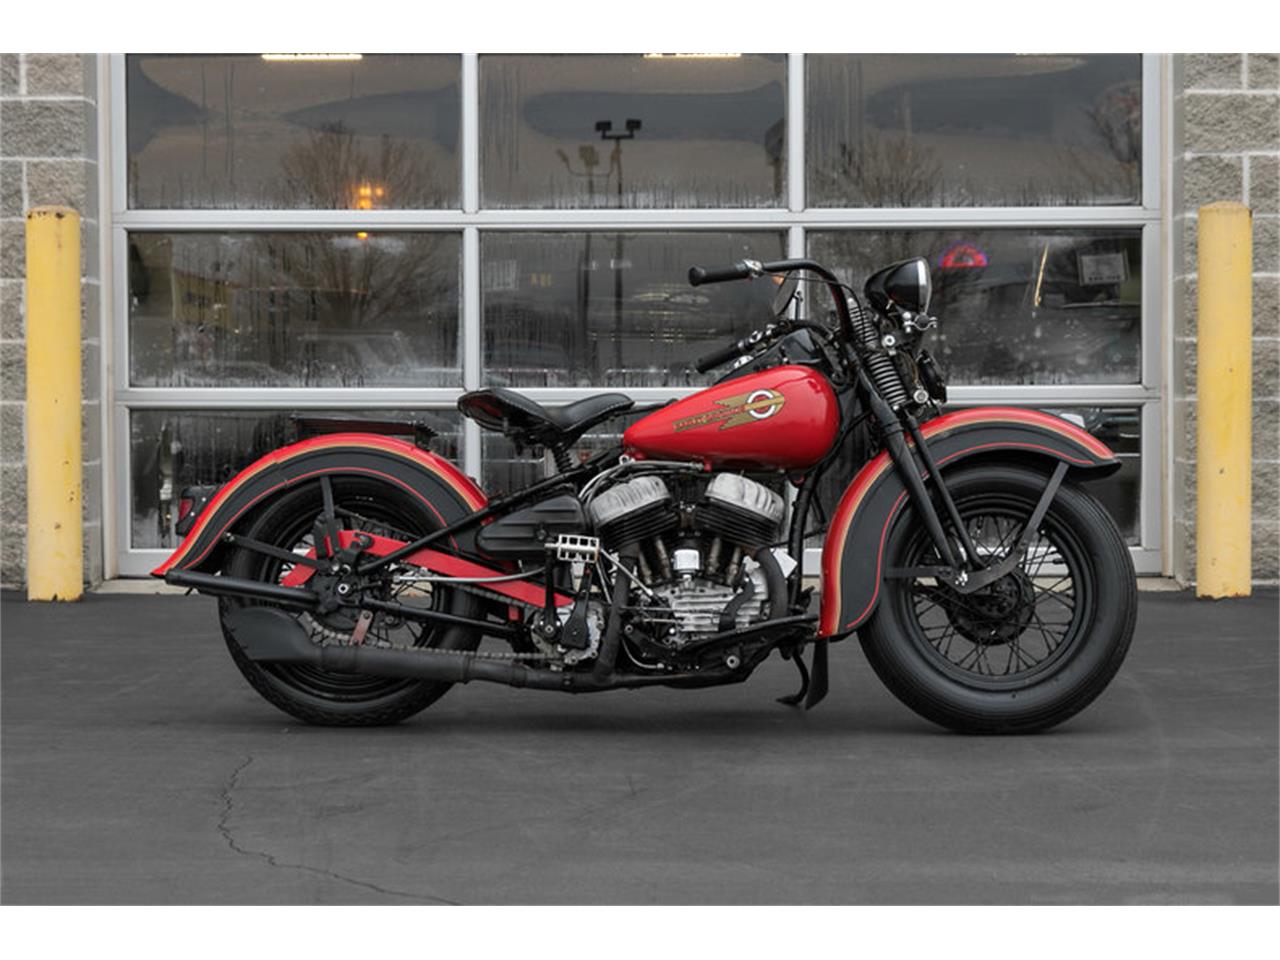 1941 Harley-Davidson Motorcycle for Sale | ClassicCars.com ...